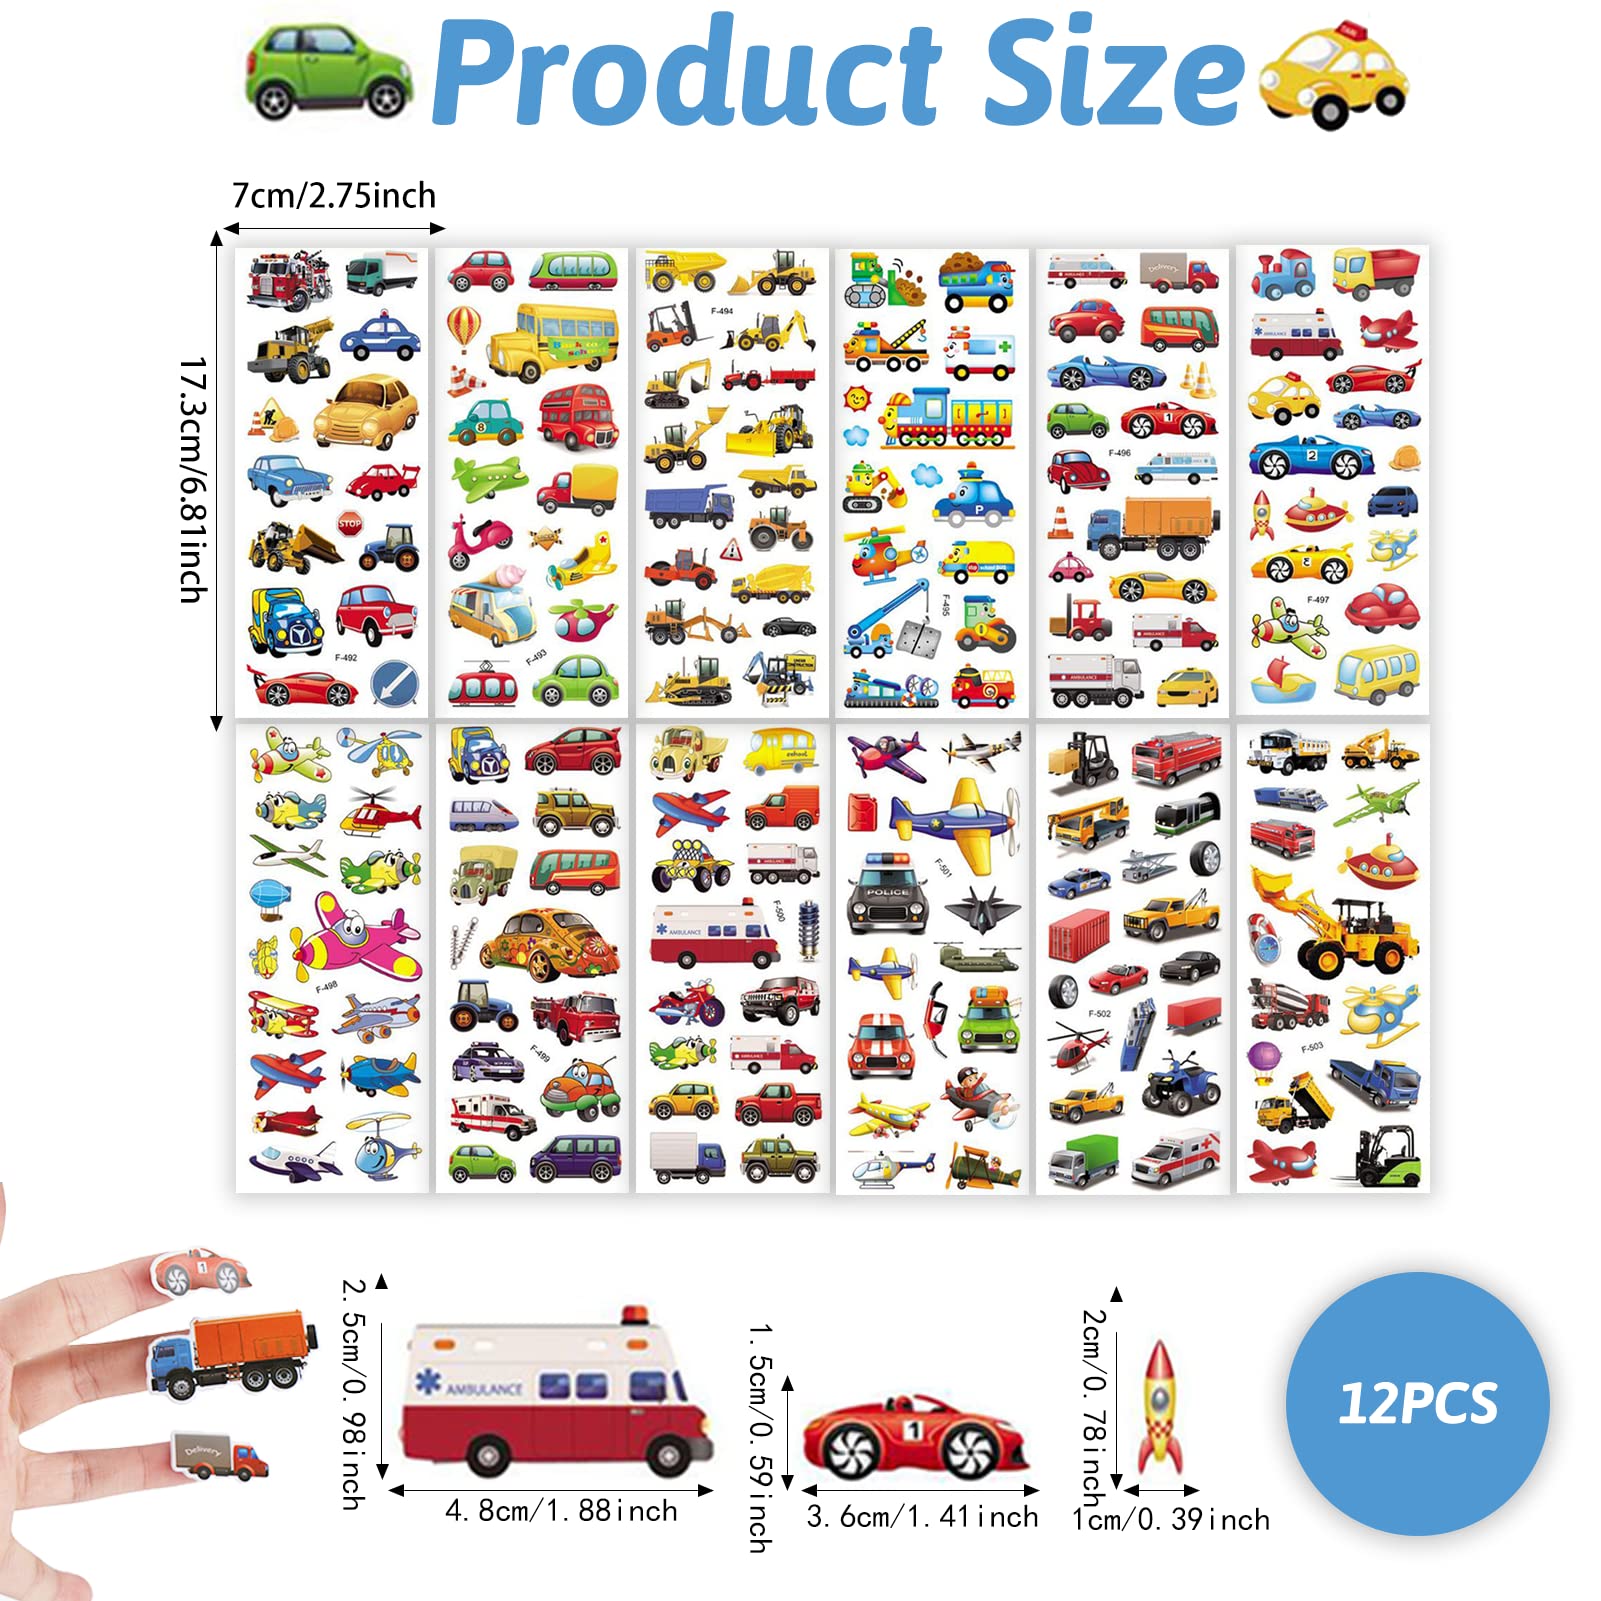 12 Sheets Cars 3D Puffy Stickers, Car Theme Set DIY Decoration Craft Activities and Party Bag Filler Favours-Vehicle Stickers for Kids with Cars Airplane Train Ambulance Fire Trucks and More (car)